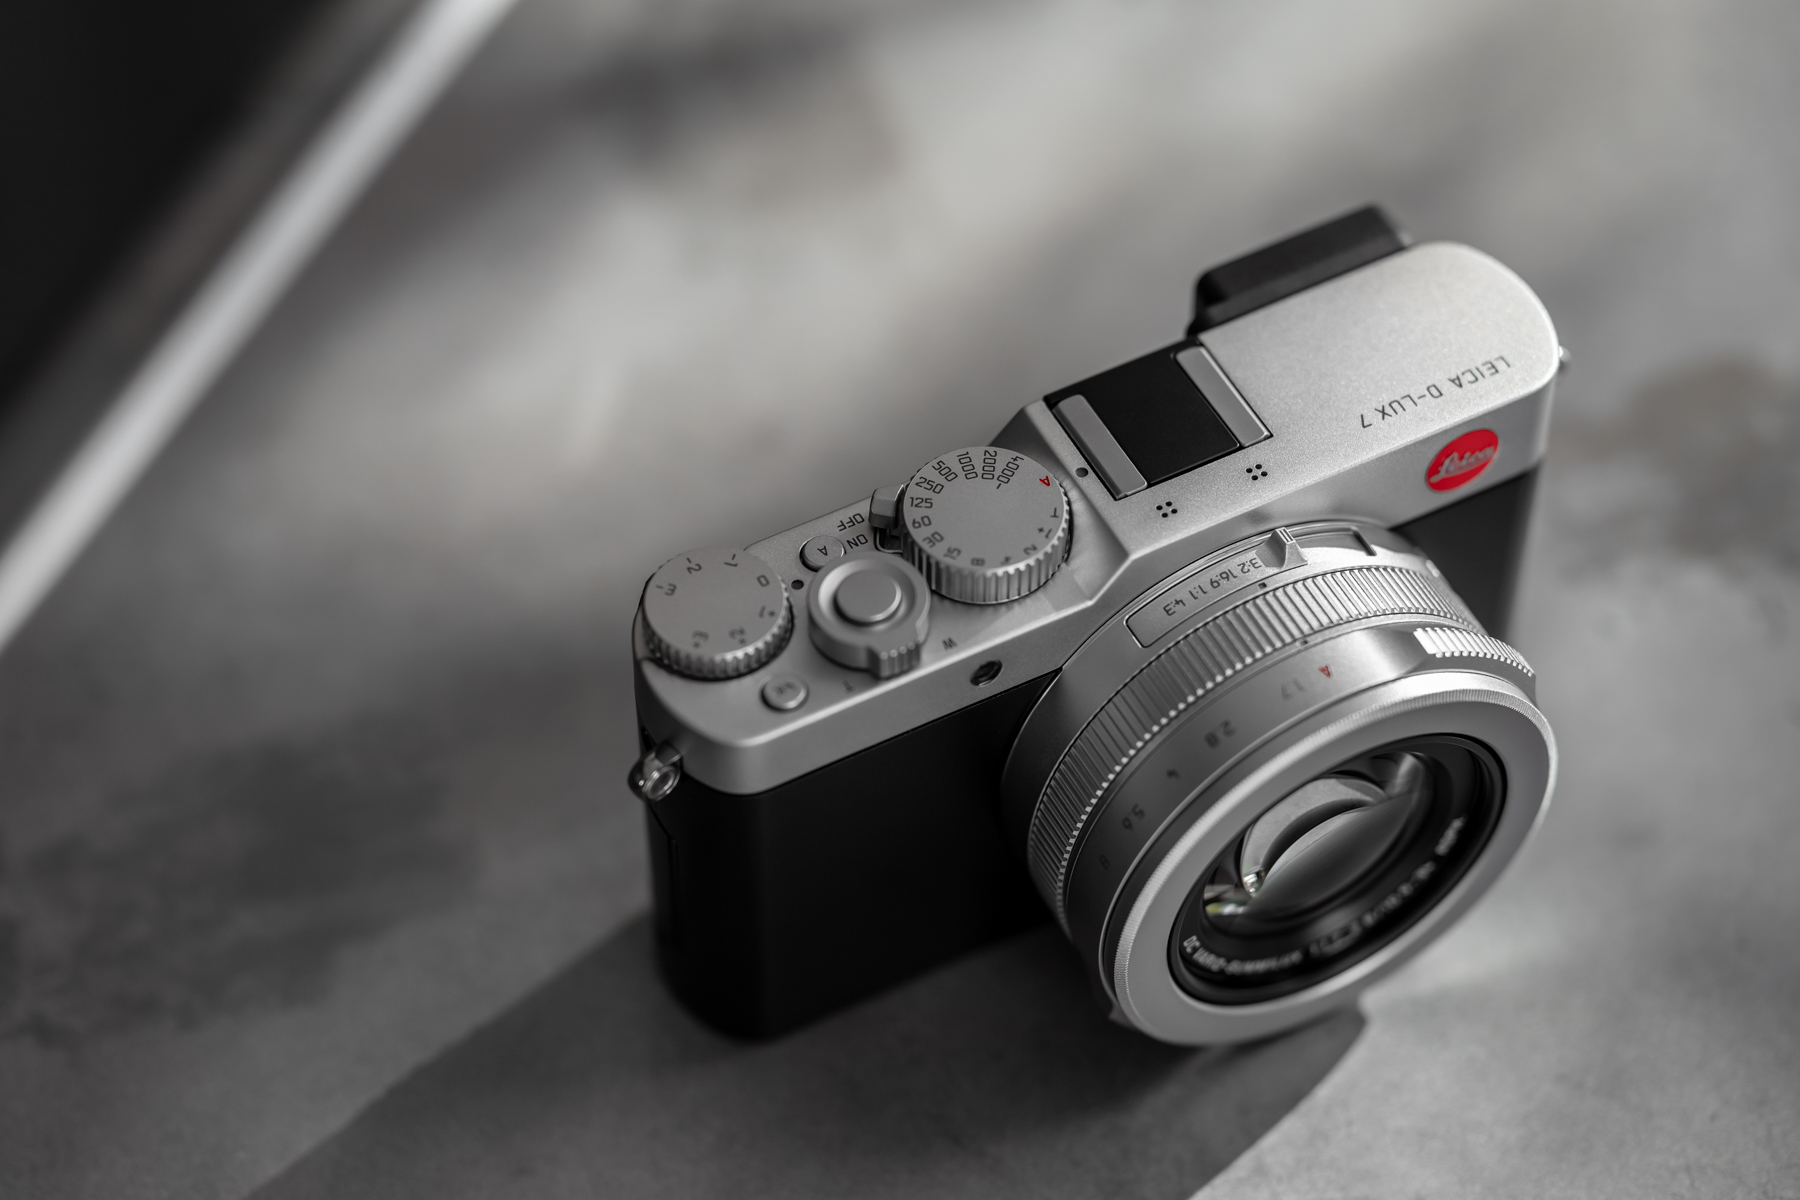 BONEV PHOTOGRAPHY - Leica D-Lux 109 review article